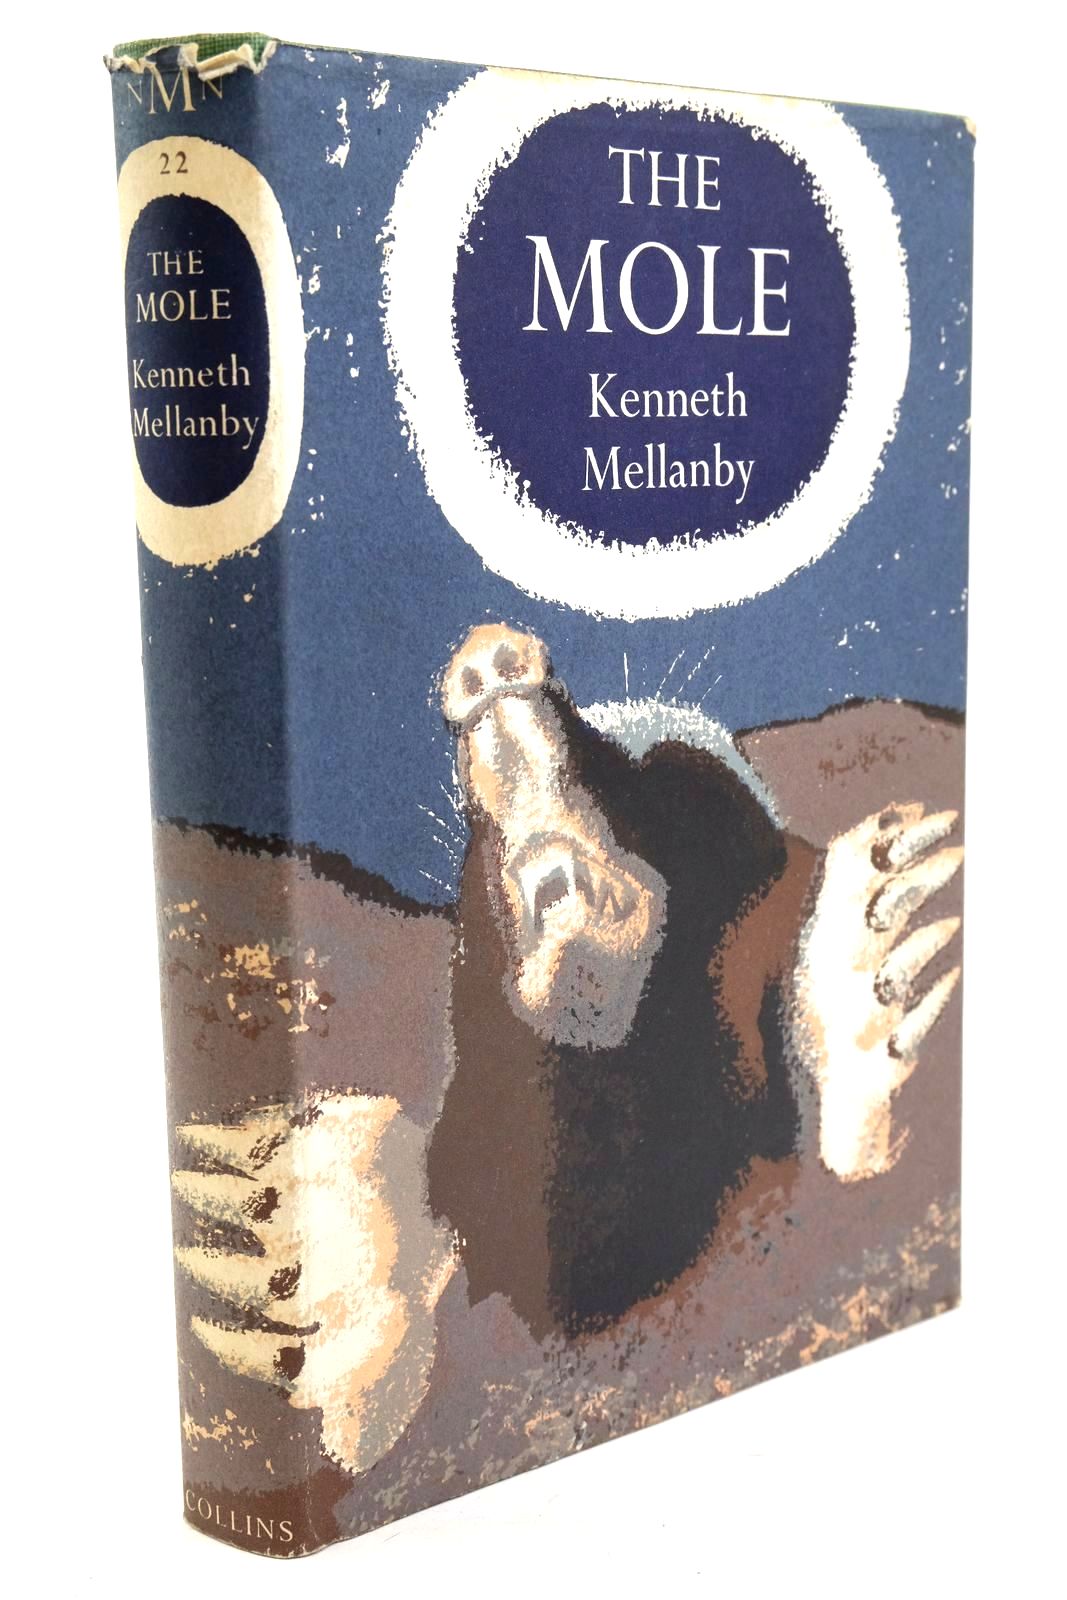 Photo of THE MOLE (NMN 22) written by Mellanby, Kenneth published by Collins (STOCK CODE: 1320817)  for sale by Stella & Rose's Books